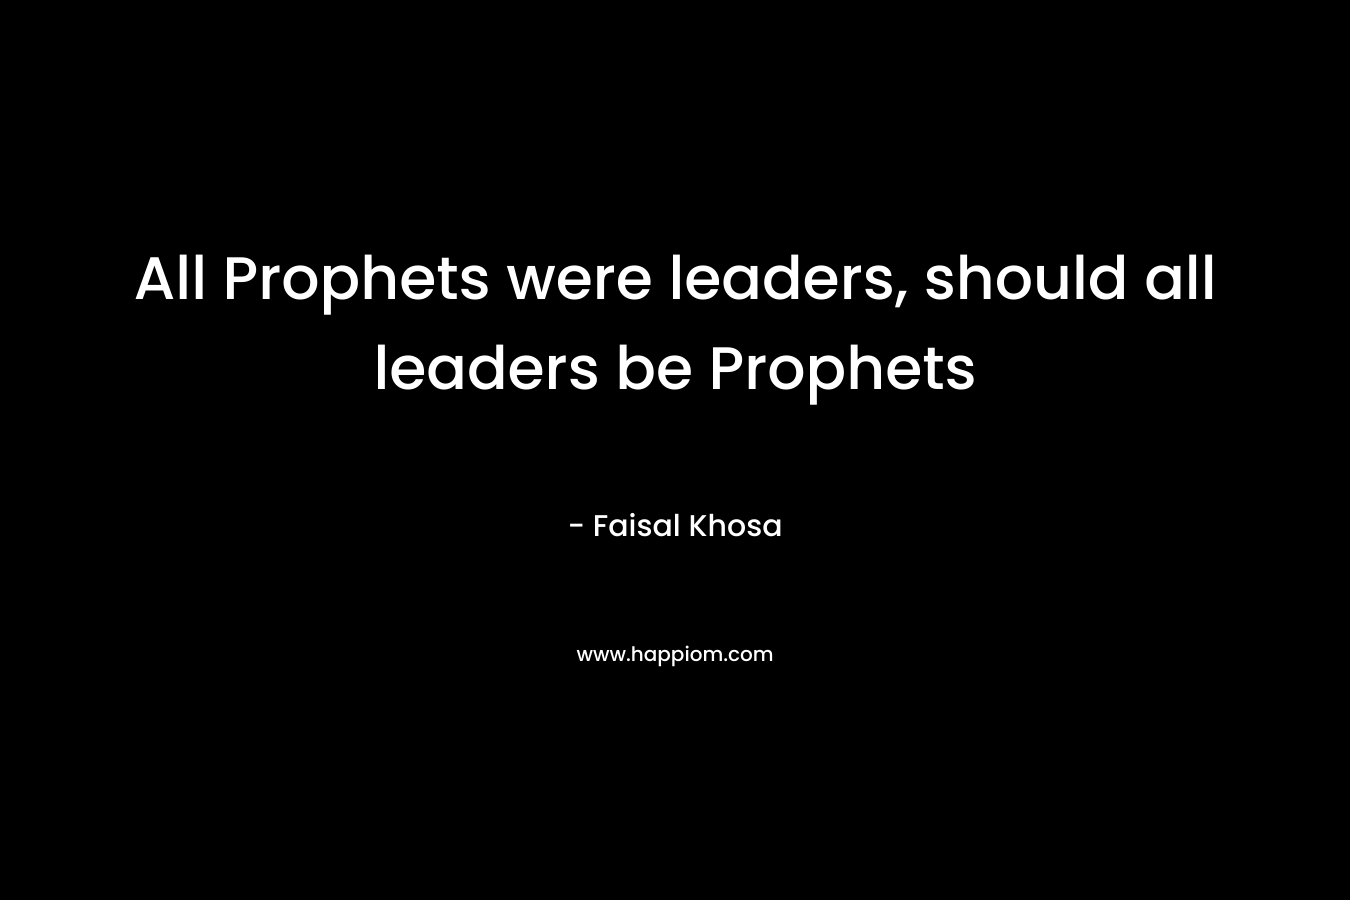 All Prophets were leaders, should all leaders be Prophets – Faisal Khosa